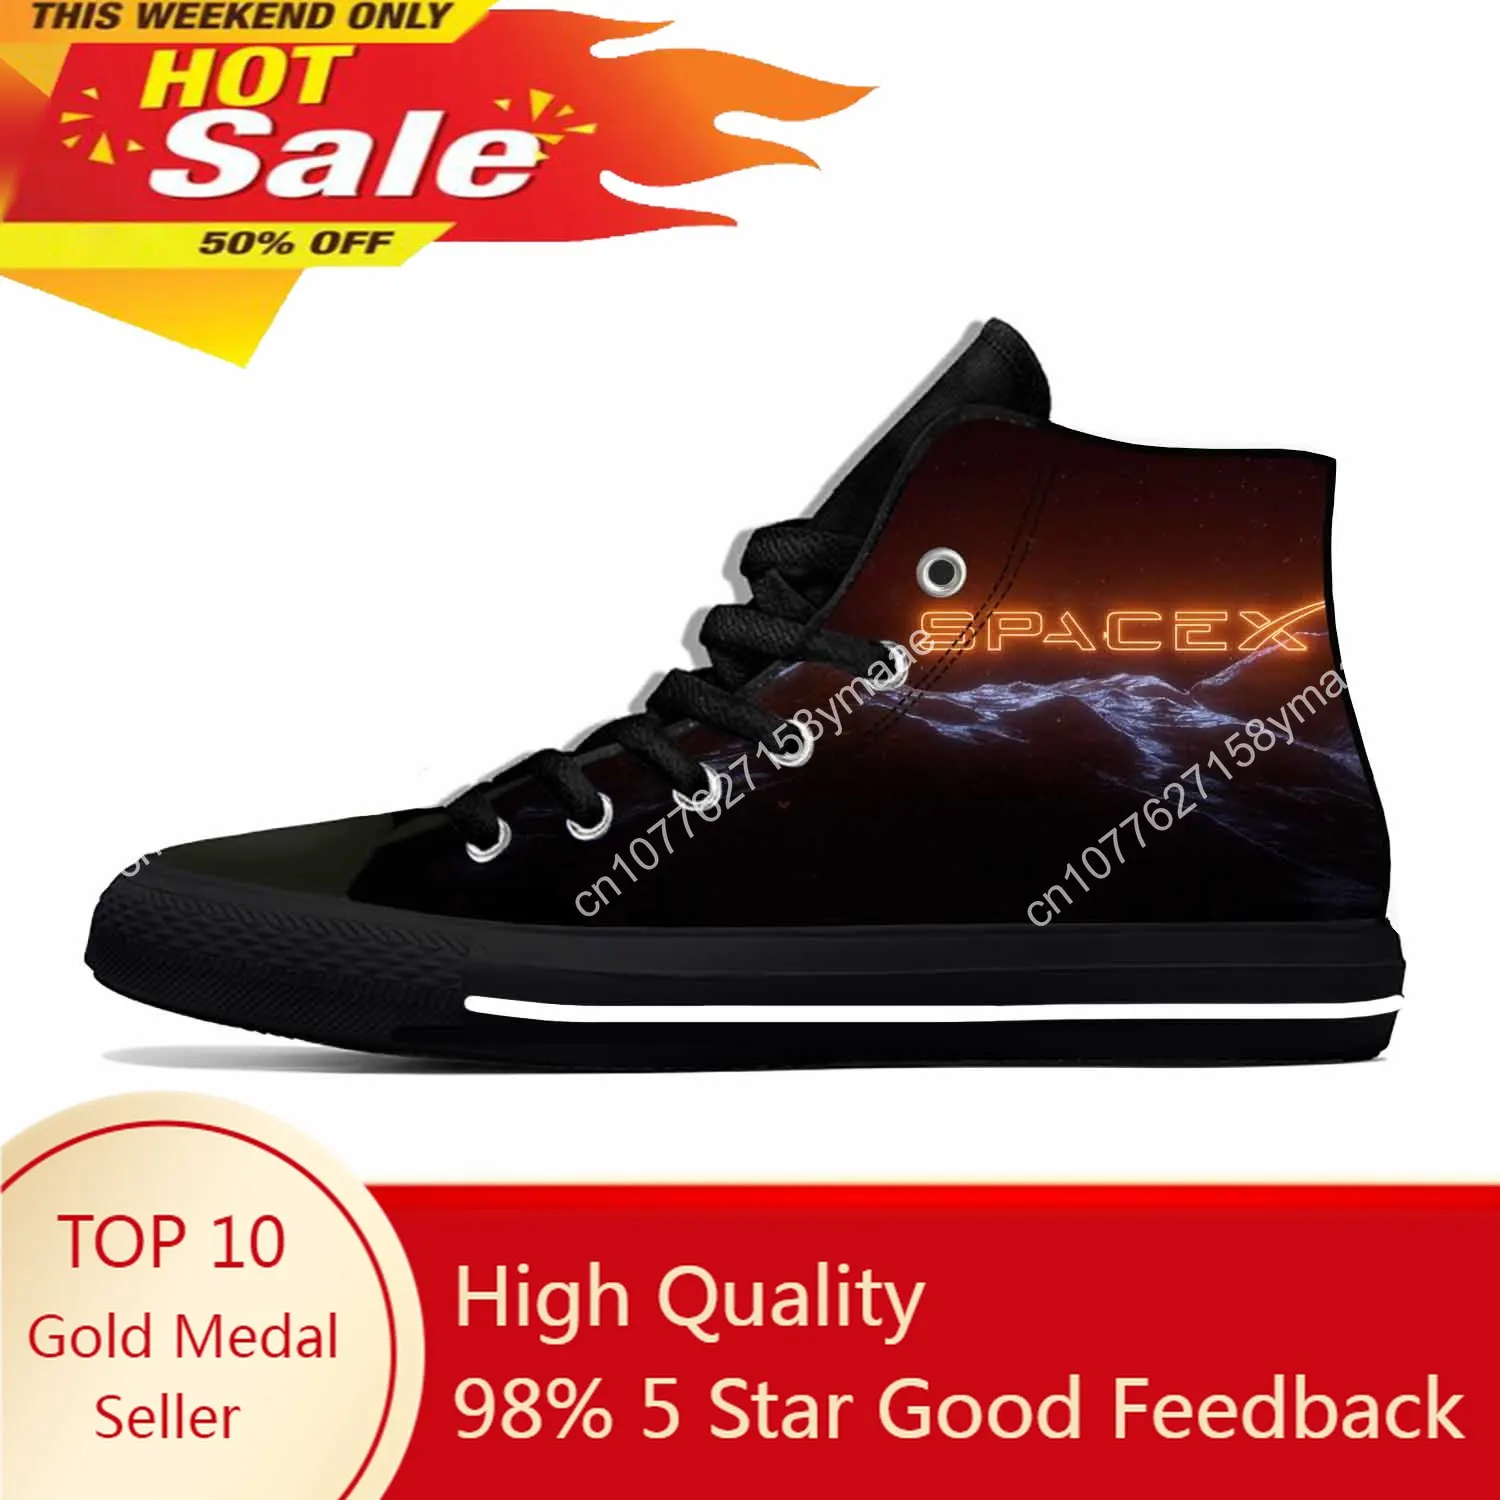 Anime Manga Cartoon SpaceX Space X Funny Fashion Casual Cloth Shoes High Top Lightweight Breathable 3D Print Men Women Sneakers anime manga hunter x hunter killua zoldyck funny casual cloth shoes high top lightweight breathable 3d print men women sneakers